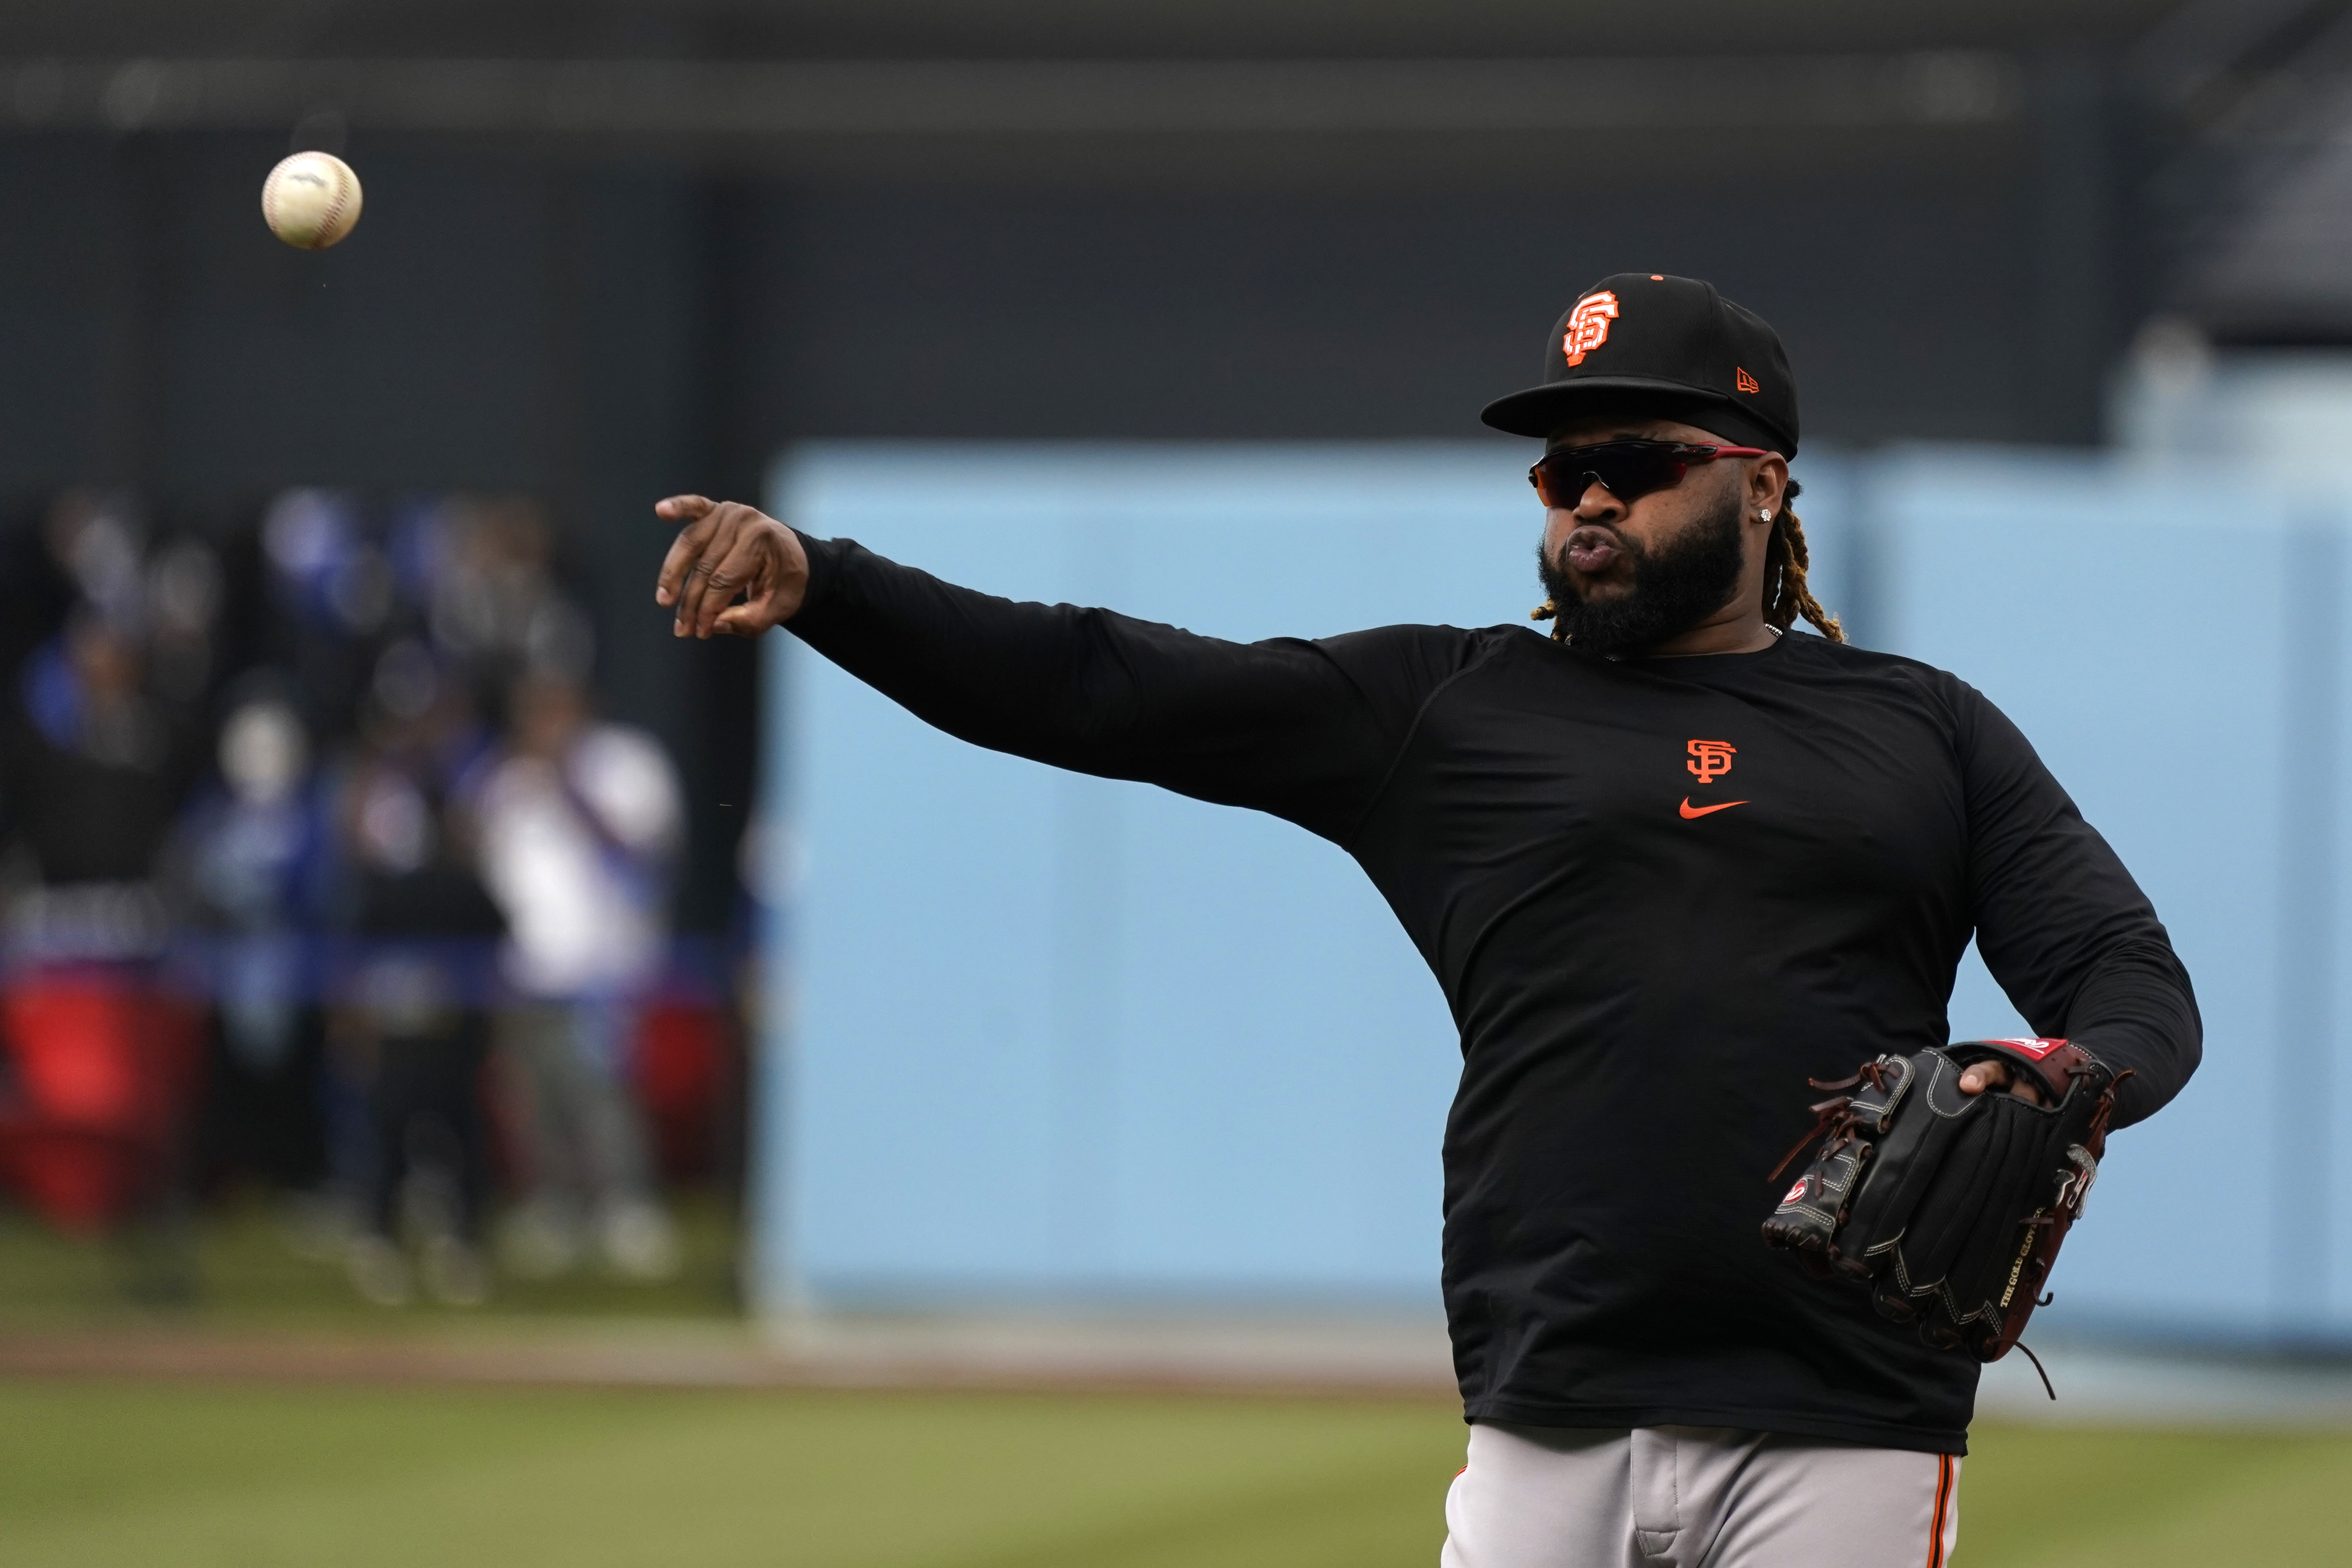 White Sox sign veteran pitcher Johnny Cueto to a minor league contract